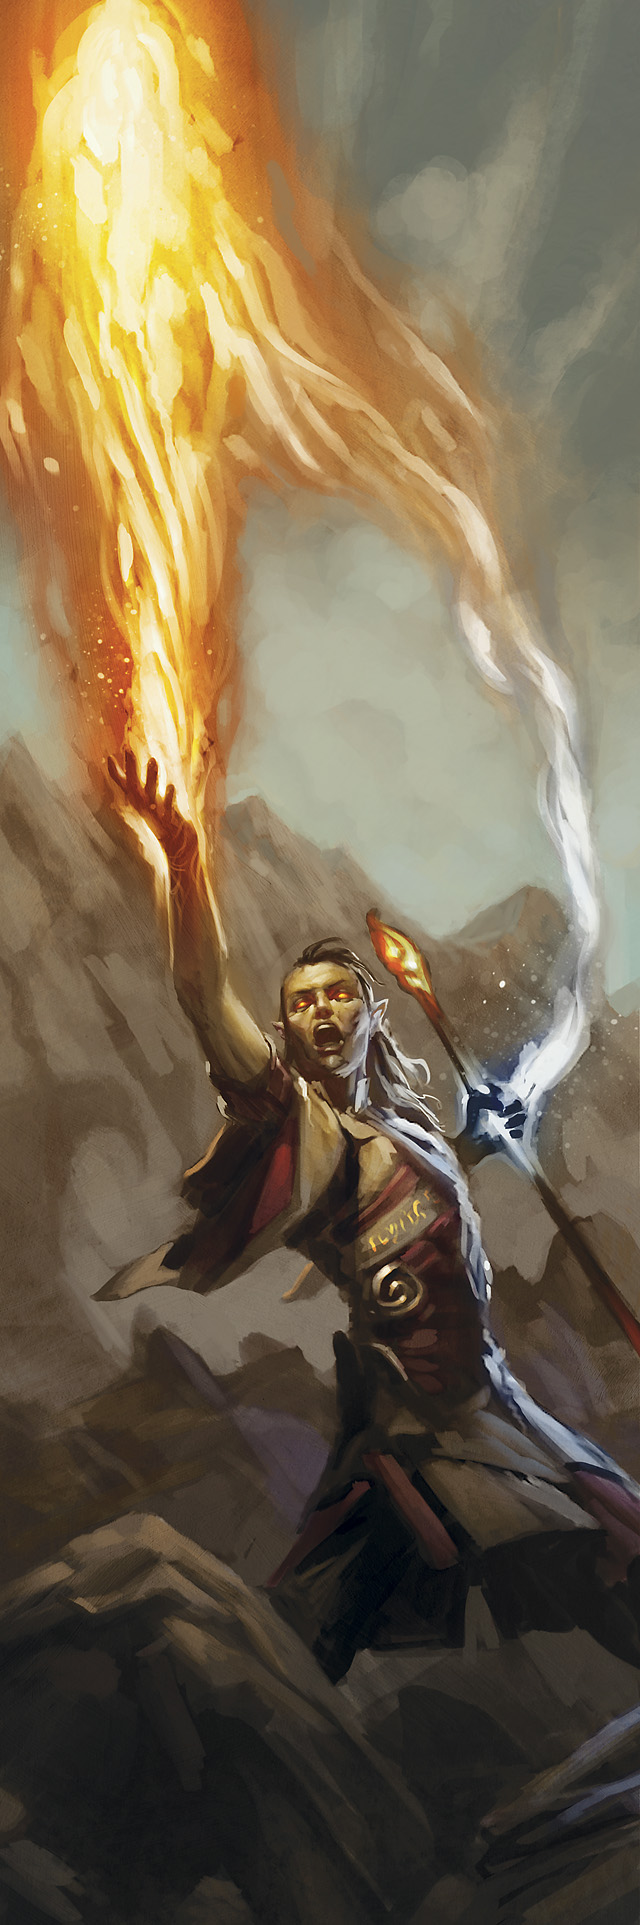 Fire Cleric